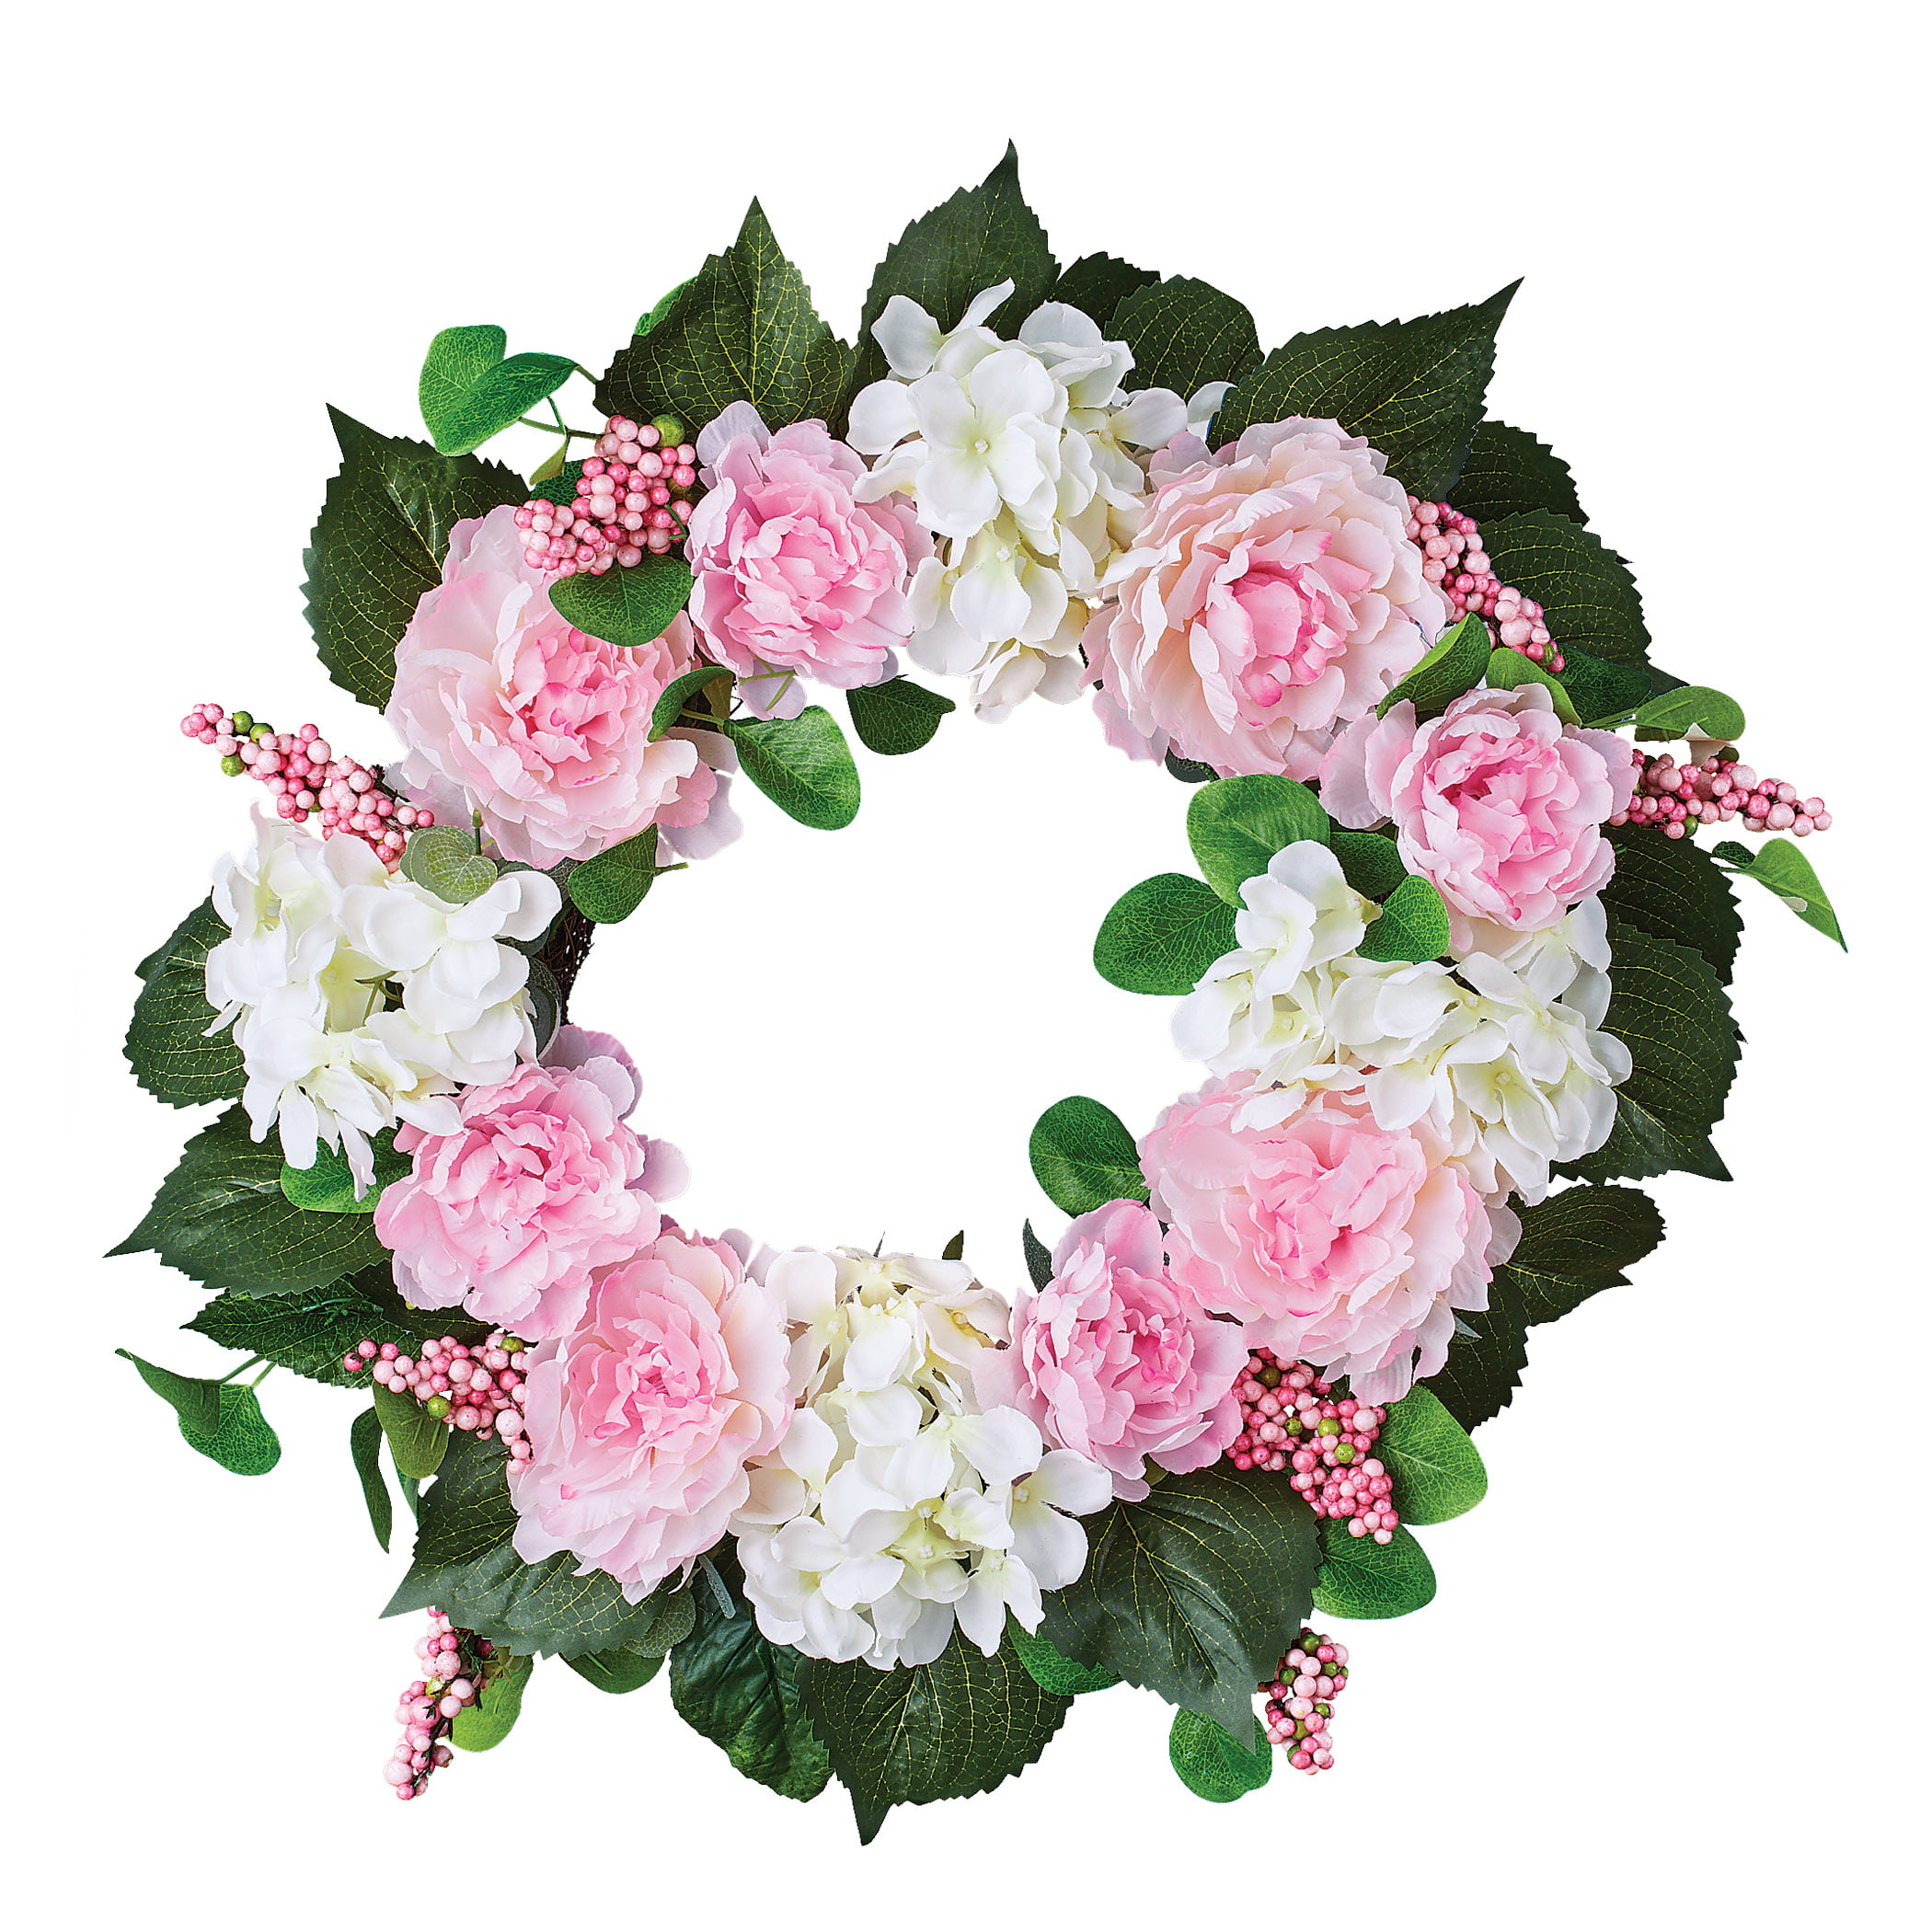 Cottage Style Floral Home Decor Natural Decor Everyday Wreath for Front Door with Peonies and Hydrangeas Mother's Day Gift